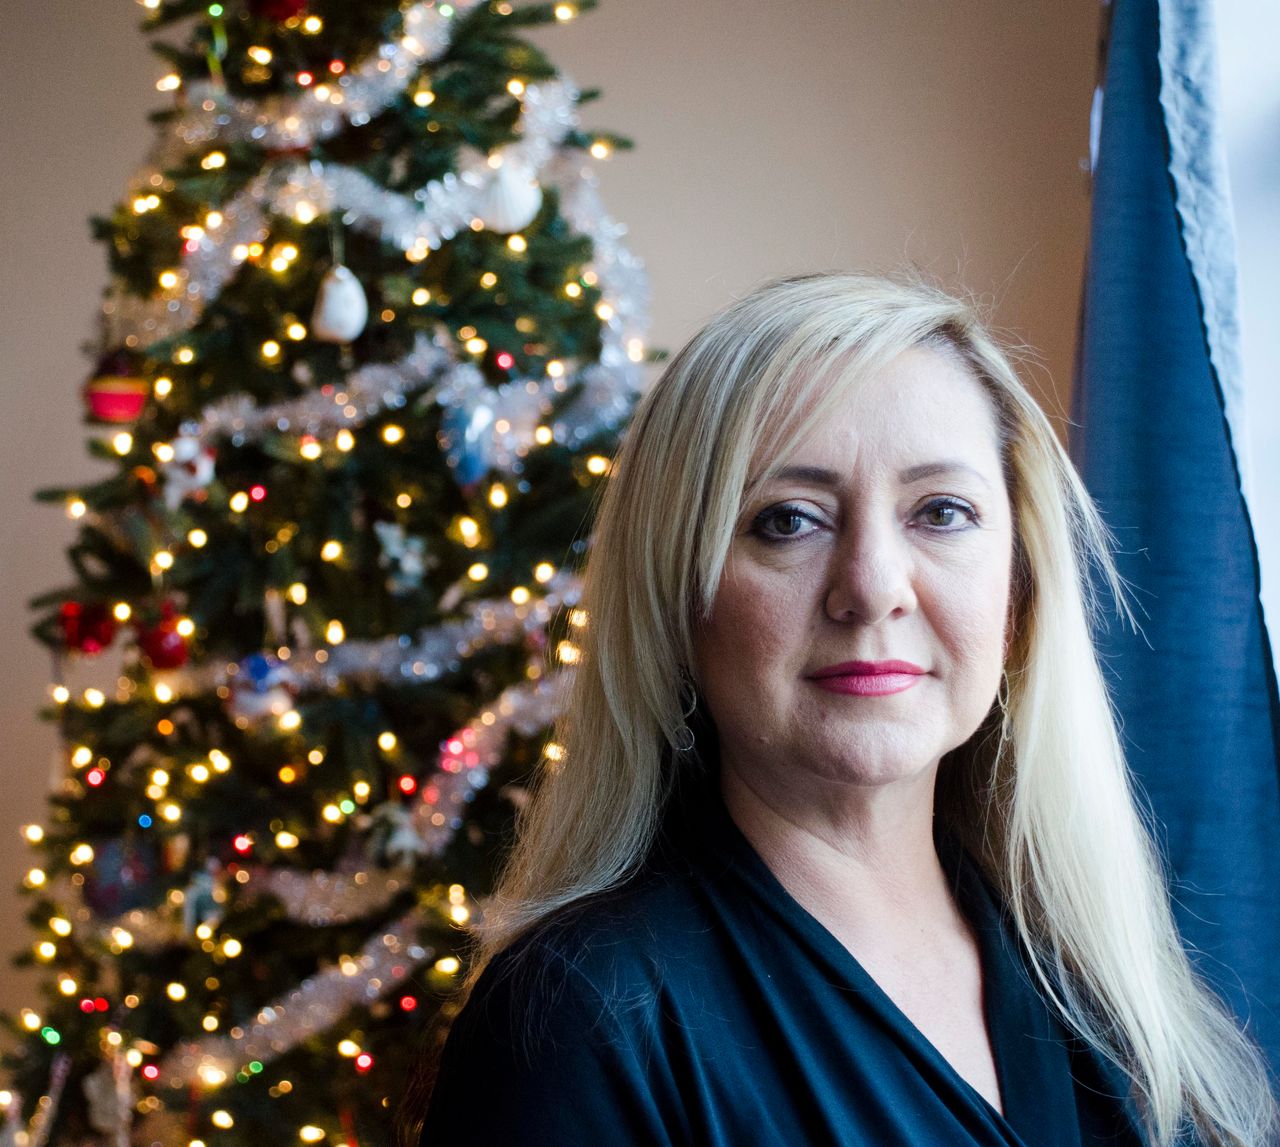 Lorena Bobbitt cut off her husband's penis in 1993. Now she runs a charity that helps domestic violence victims like herself.